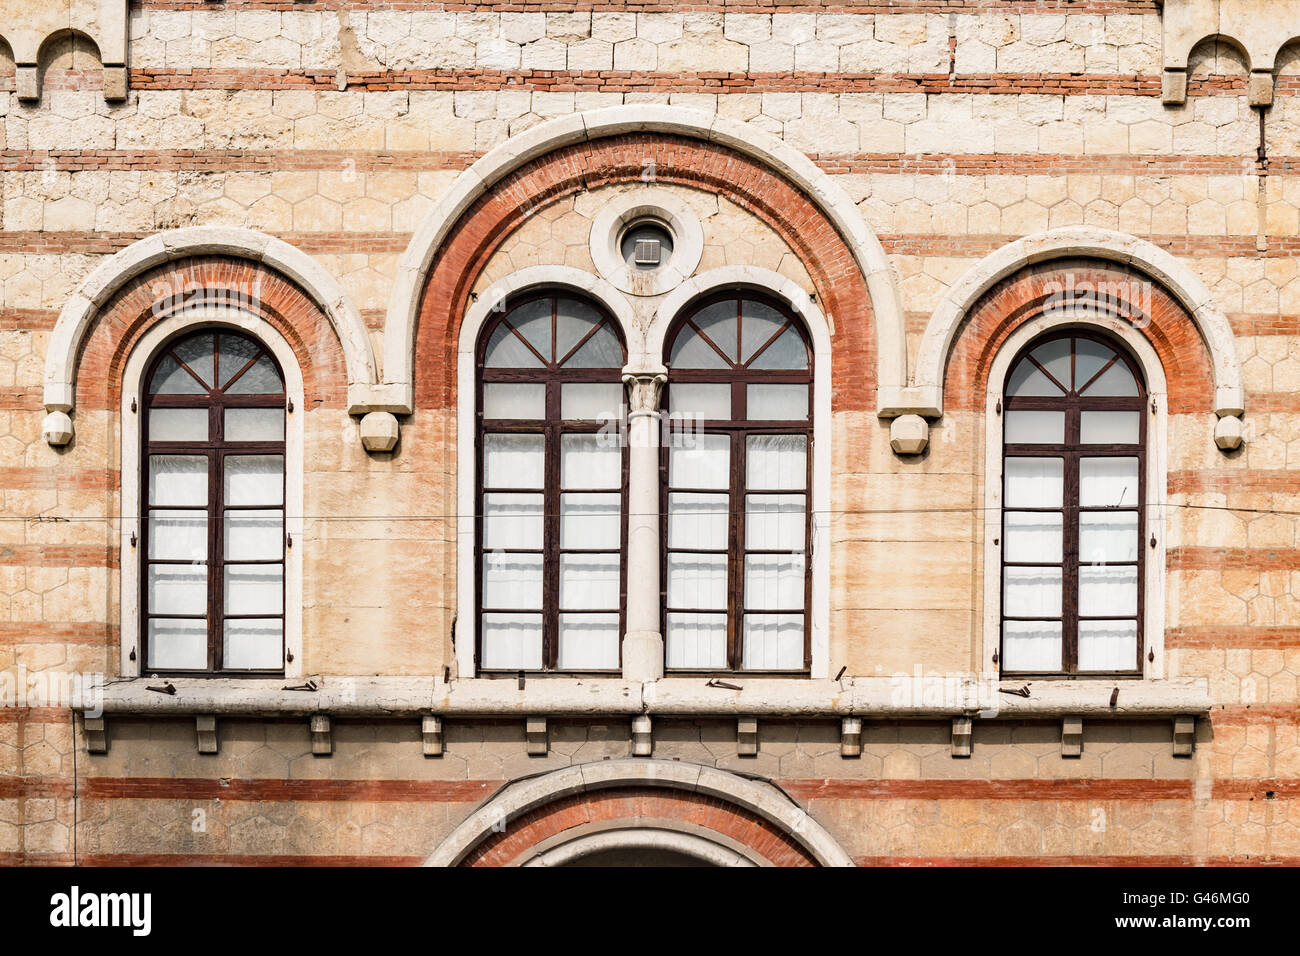 Old medieval arched windows in Romanesque style. Stock Photo